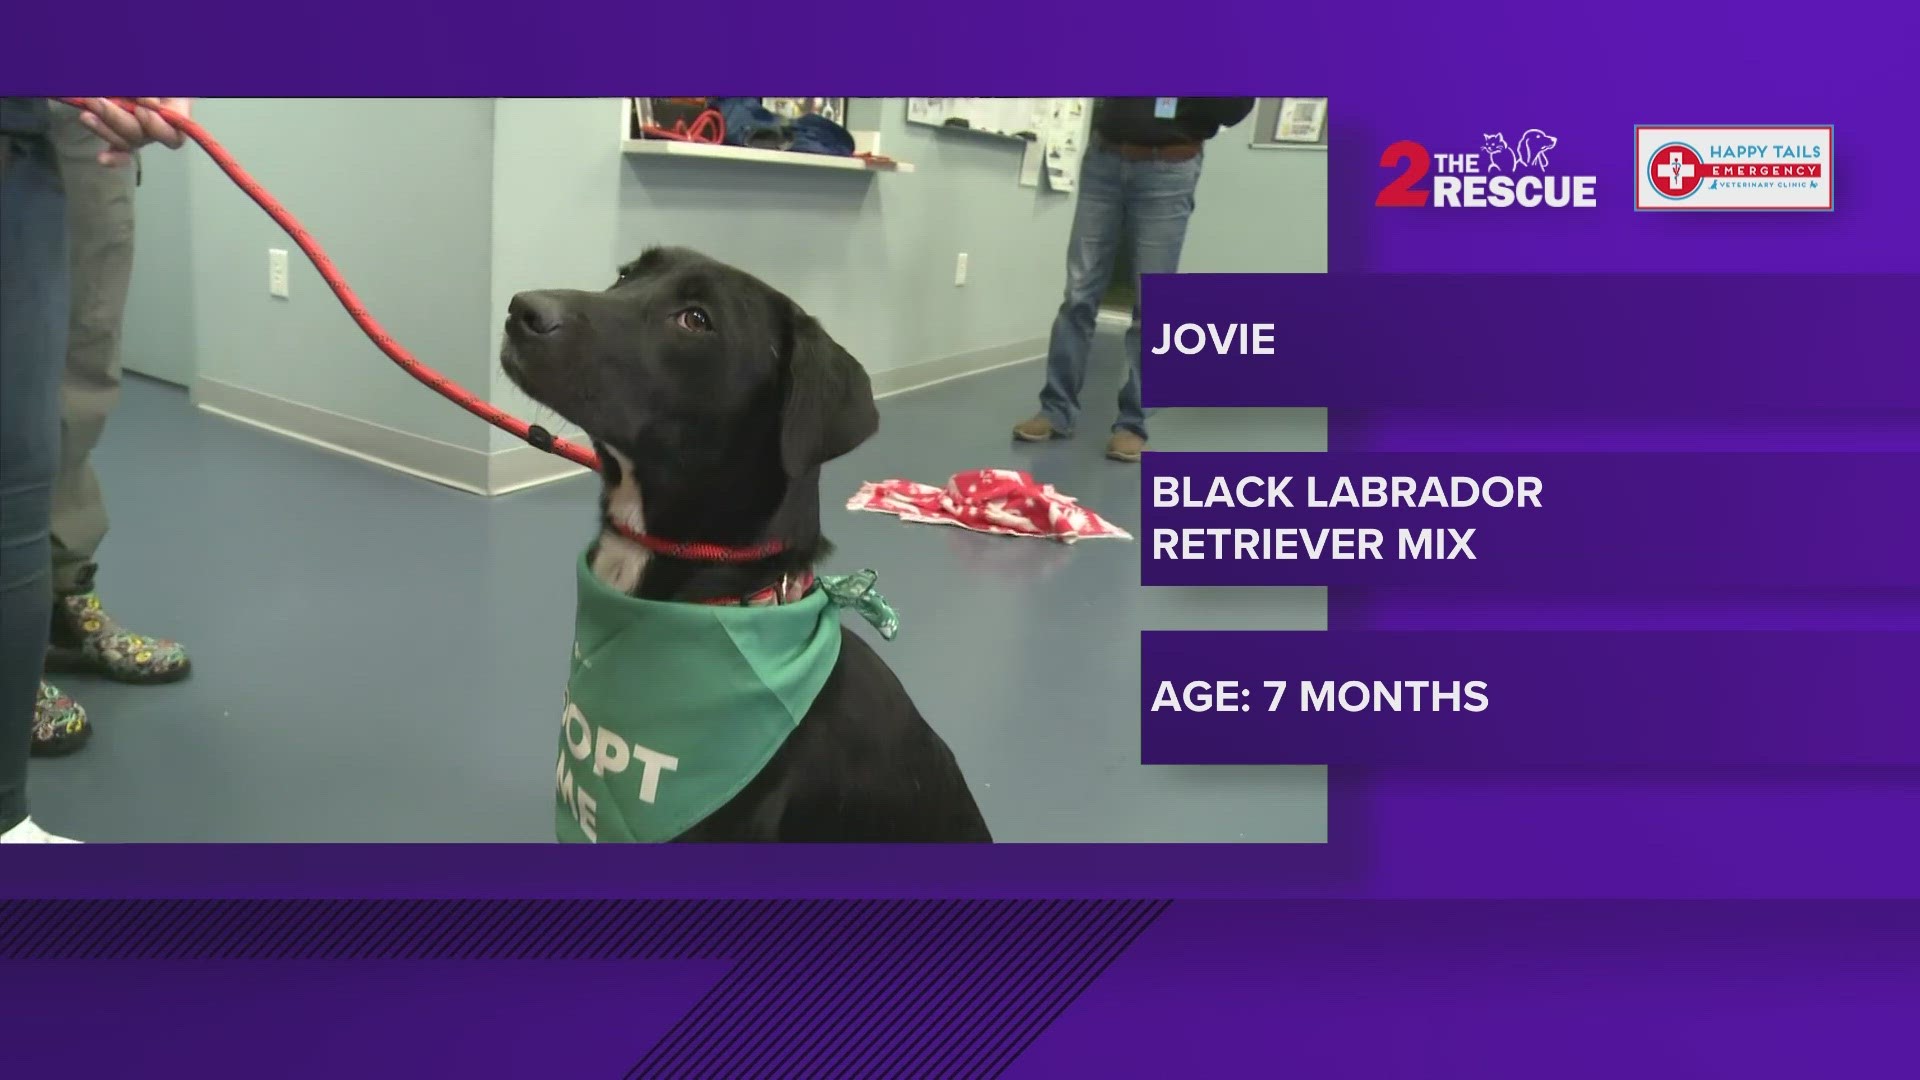 Jovie is a seven-month-old Black Labrador Retriever Mix who enjoys affection and long walks.